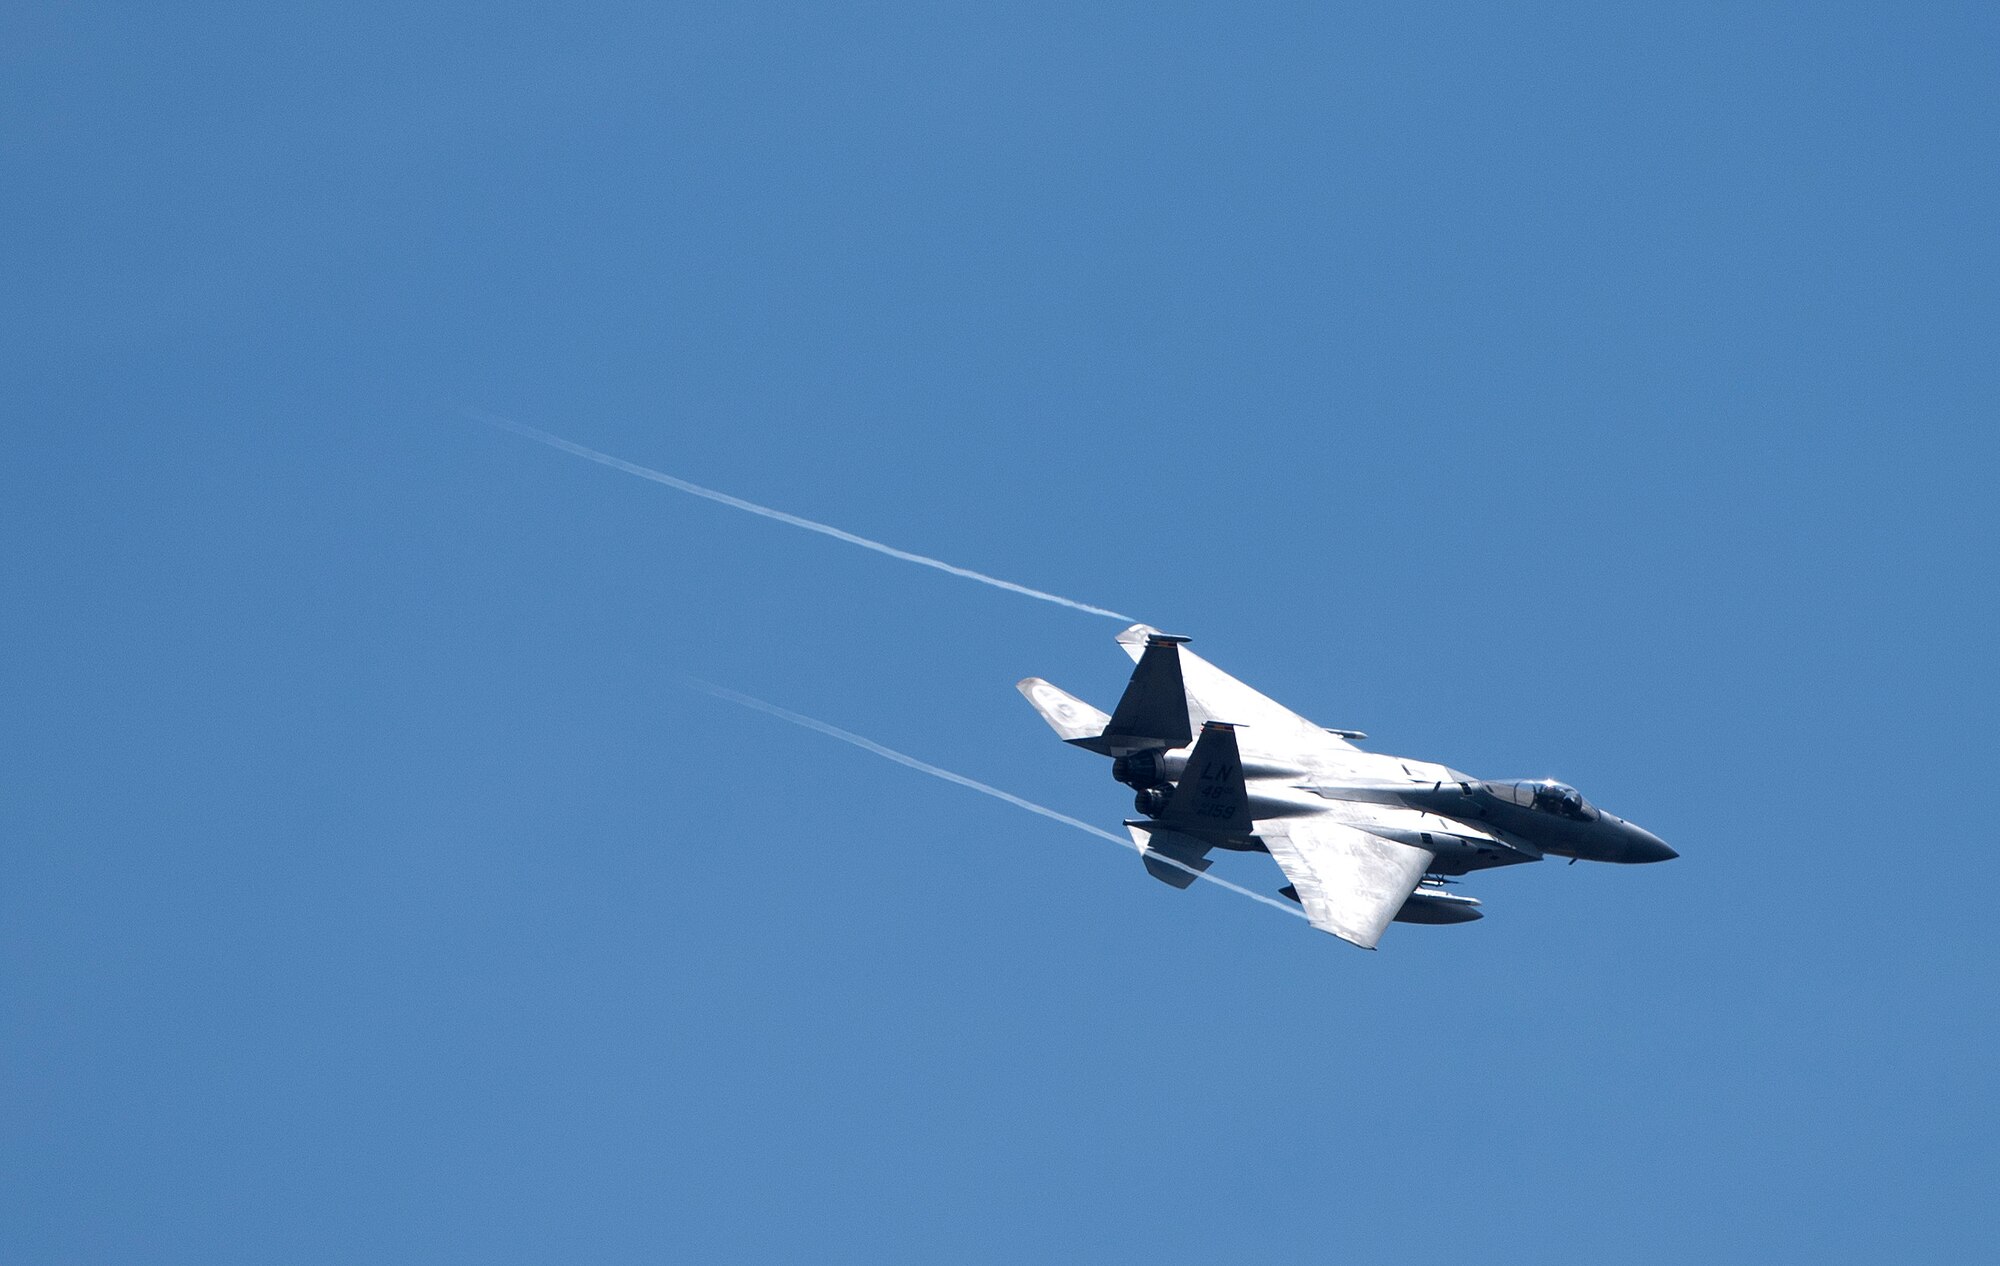 An F-15C Eagle assigned to the 493rd Fighter Squadron flies over Royal Air Force Lakenheath, England, June 2, 2020. The Eagle's air superiority is achieved through a mixture of unprecedented maneuverability and acceleration, range, weapons and avionics. (U.S. Air Force photo by Airman 1st Class Jessi Monte)